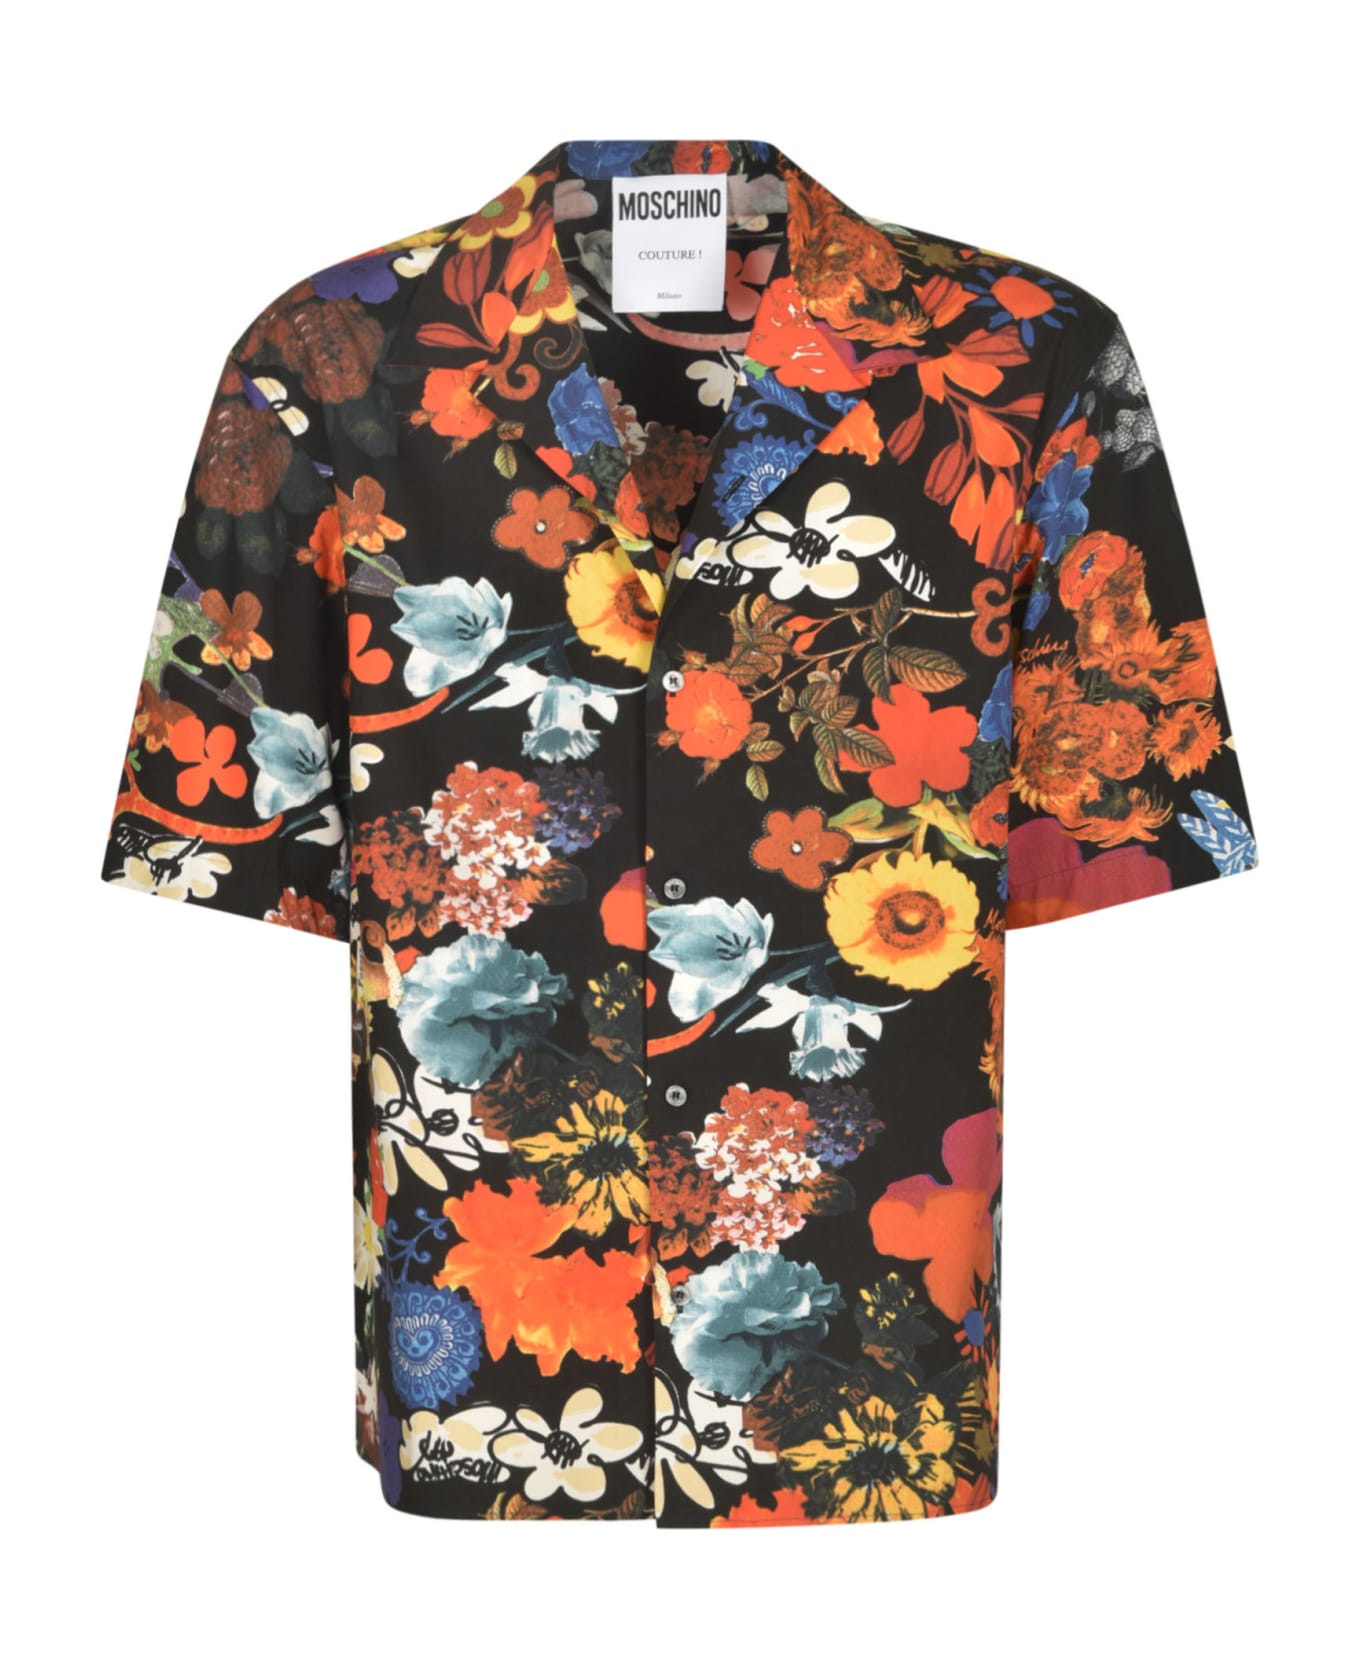 Moschino Floral Print Shirt - Multicolor